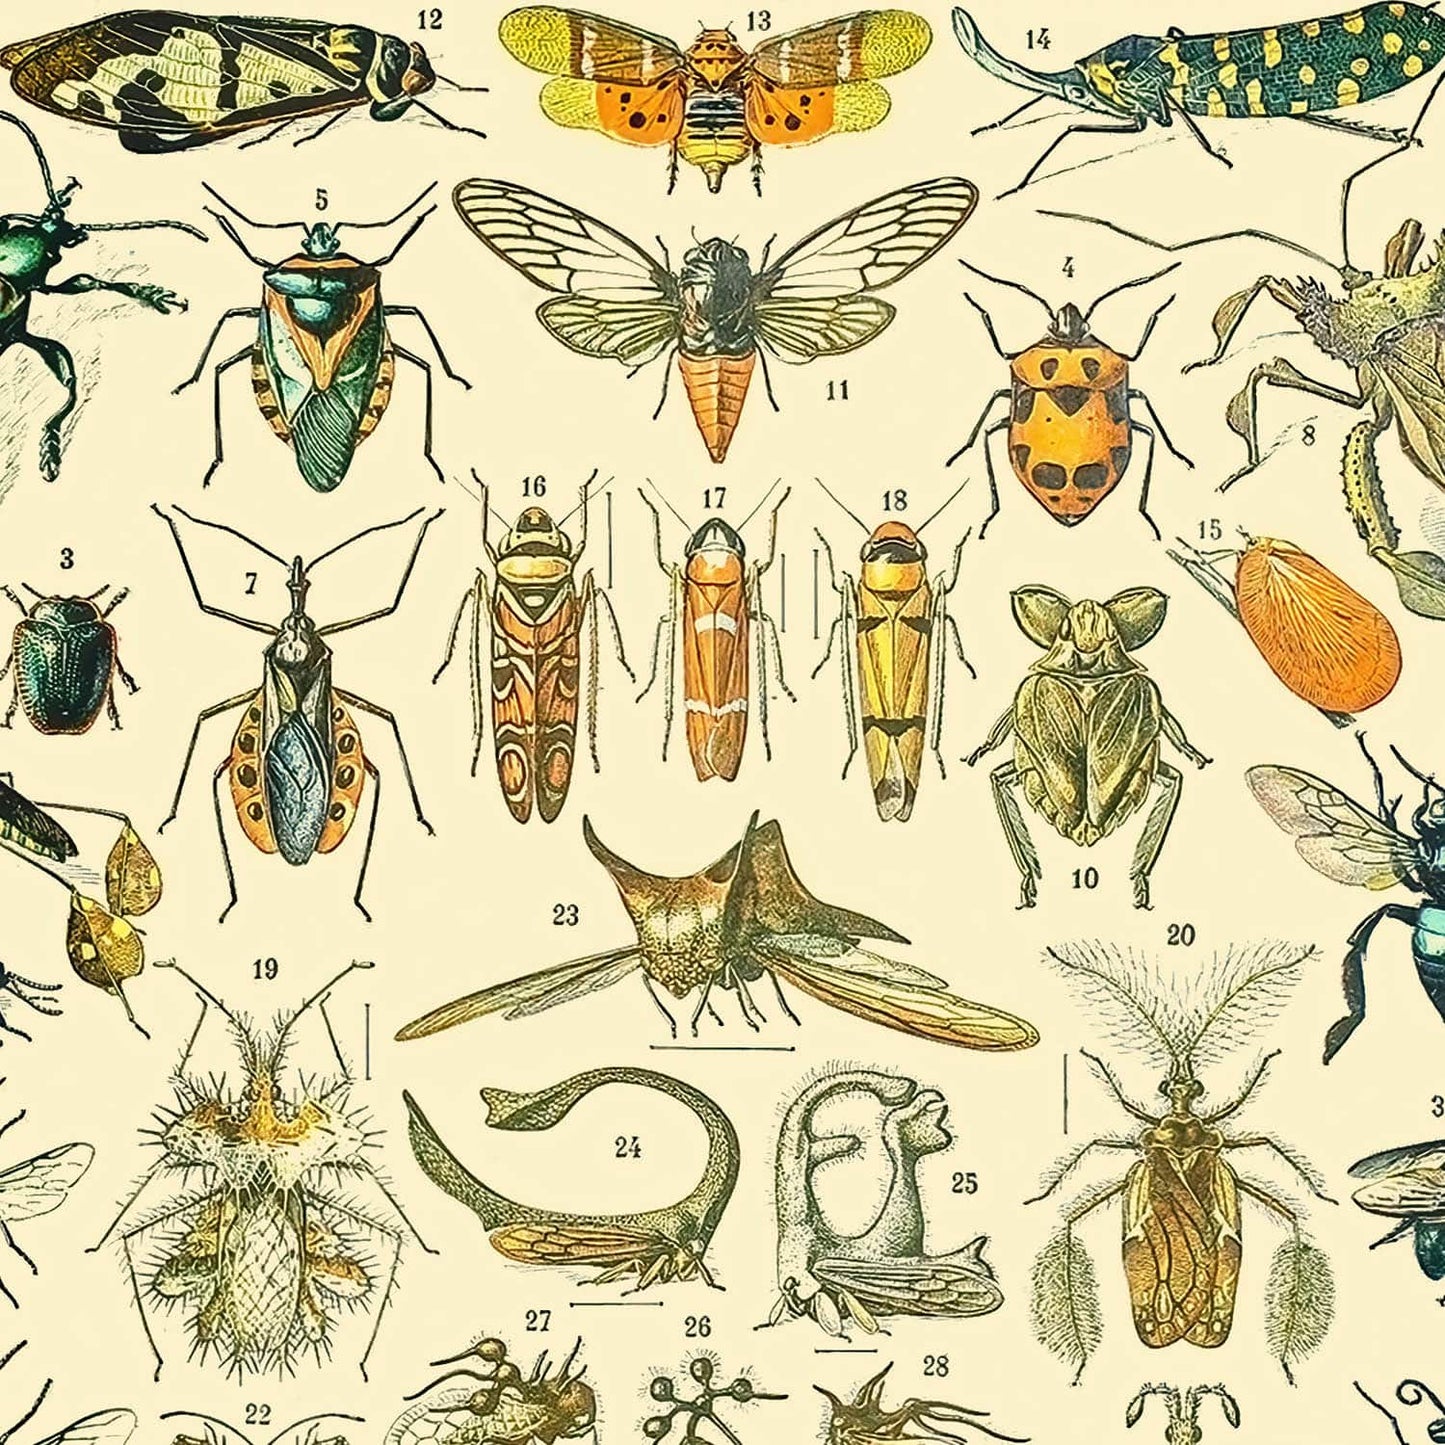 Bugs and Insects Art Print | Science Drawing | Vintage Wall Art